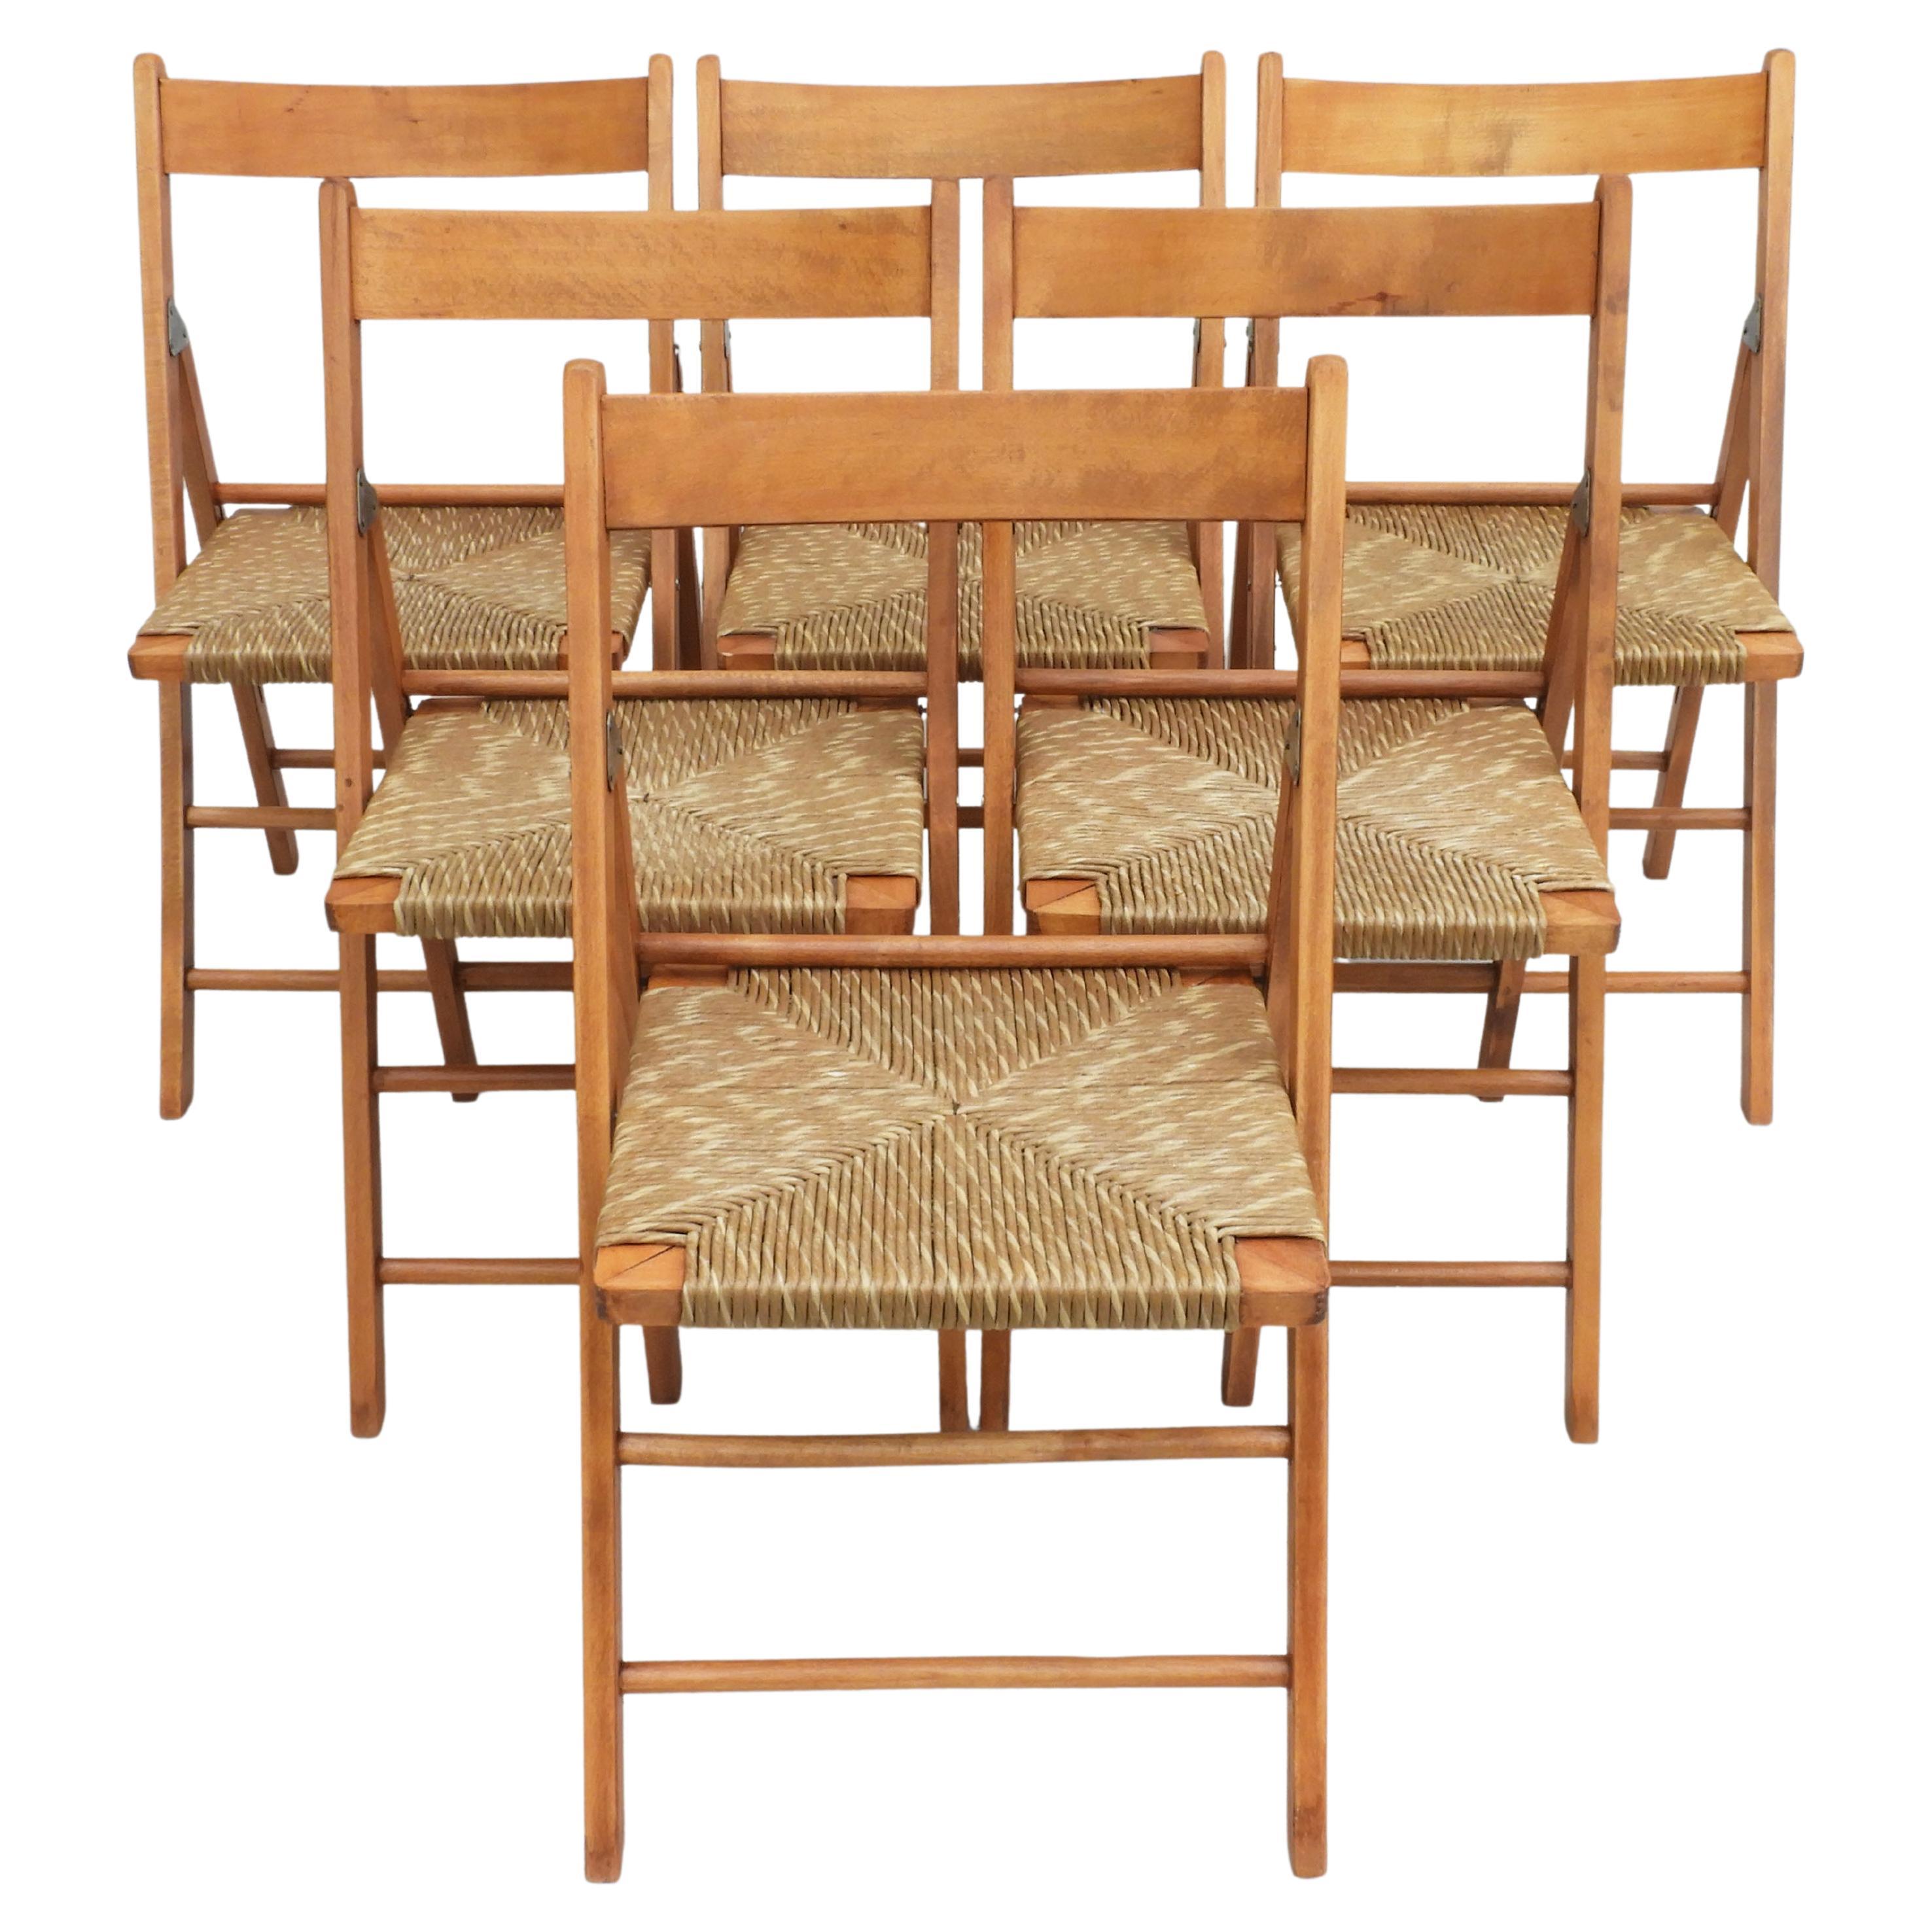 Vintage Beech Folding Chairs with Woven Paper Cord Seats C1970s France, Set of 6